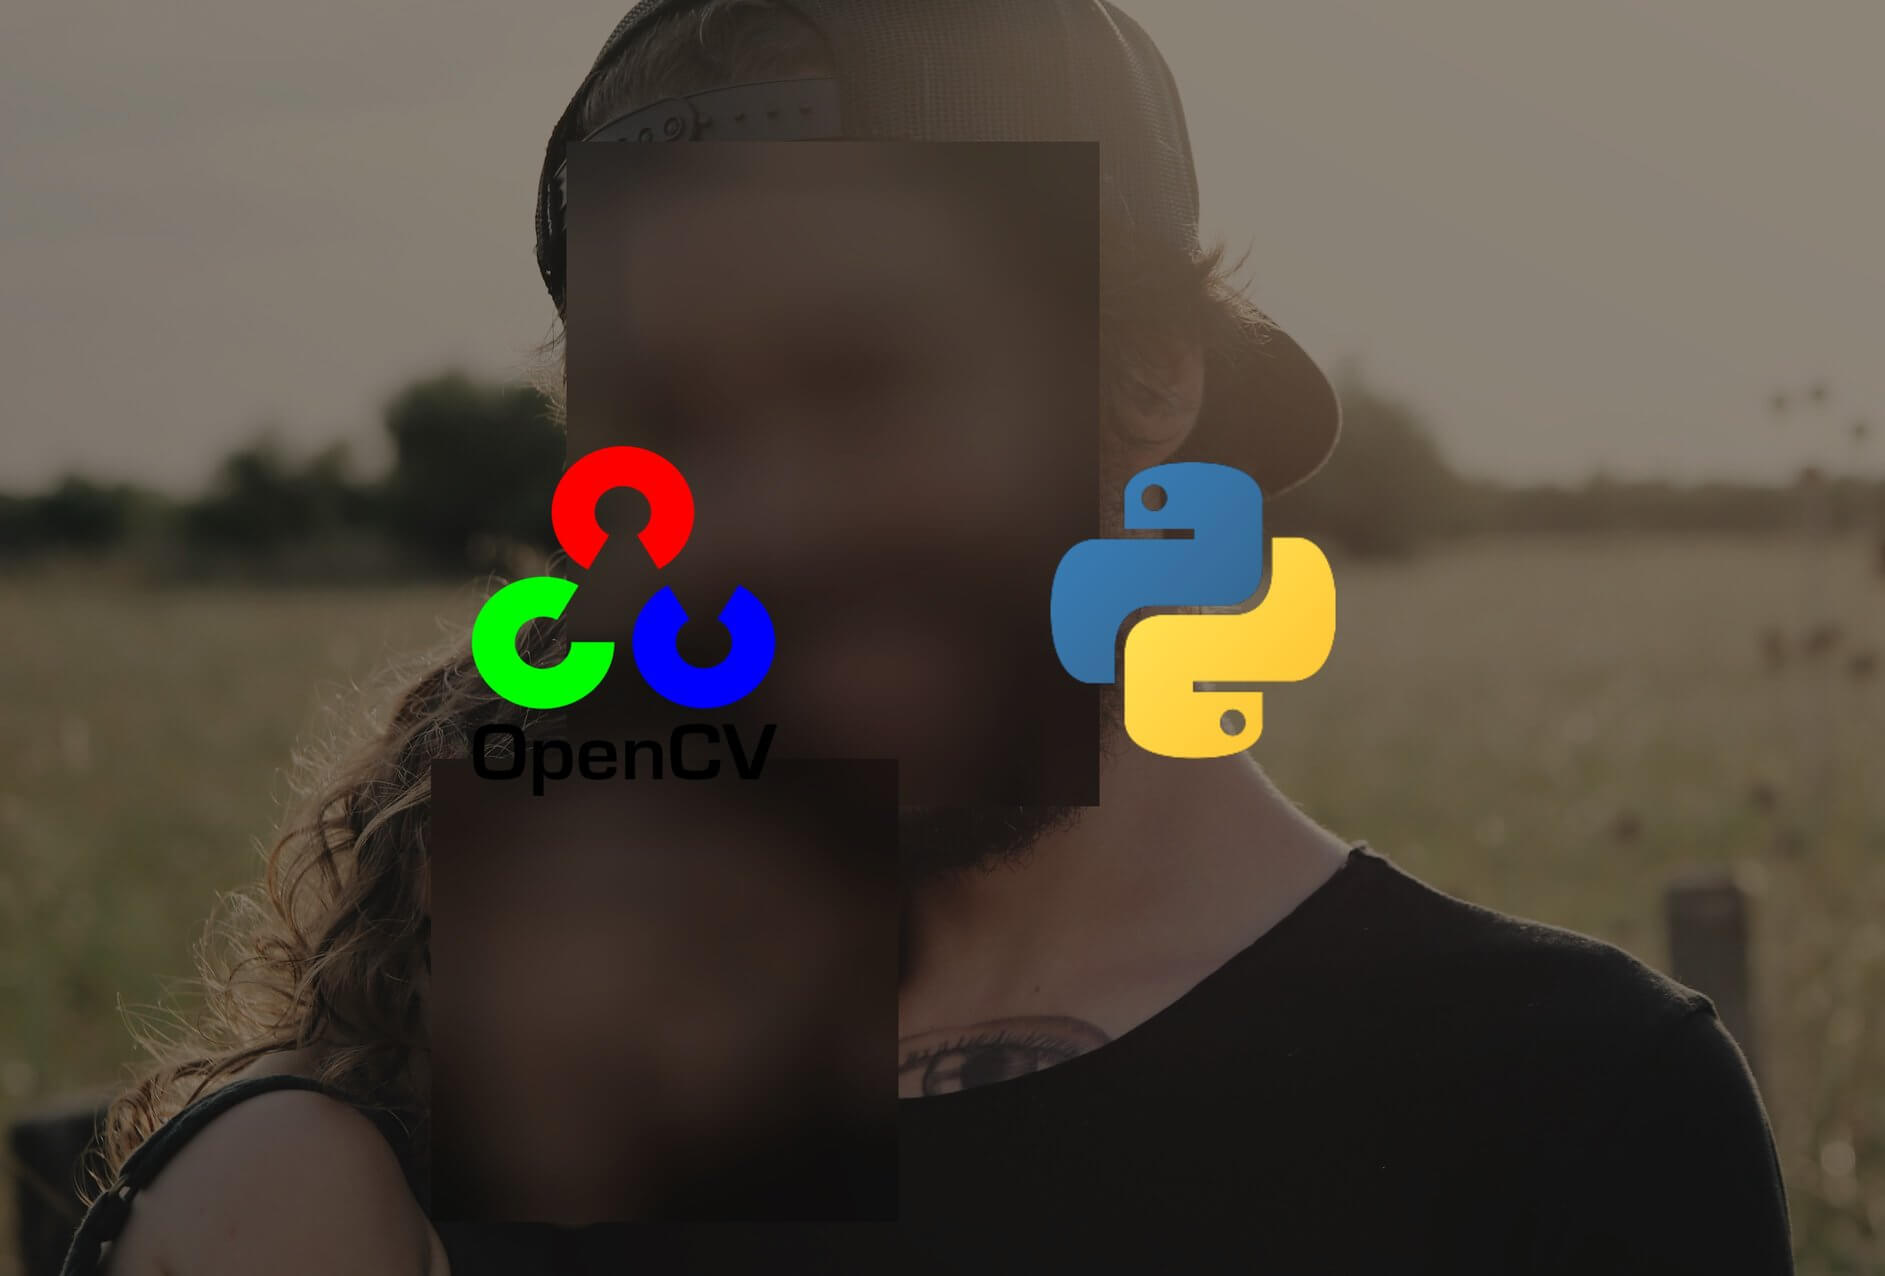 How to Blur Faces in Images using OpenCV in Python